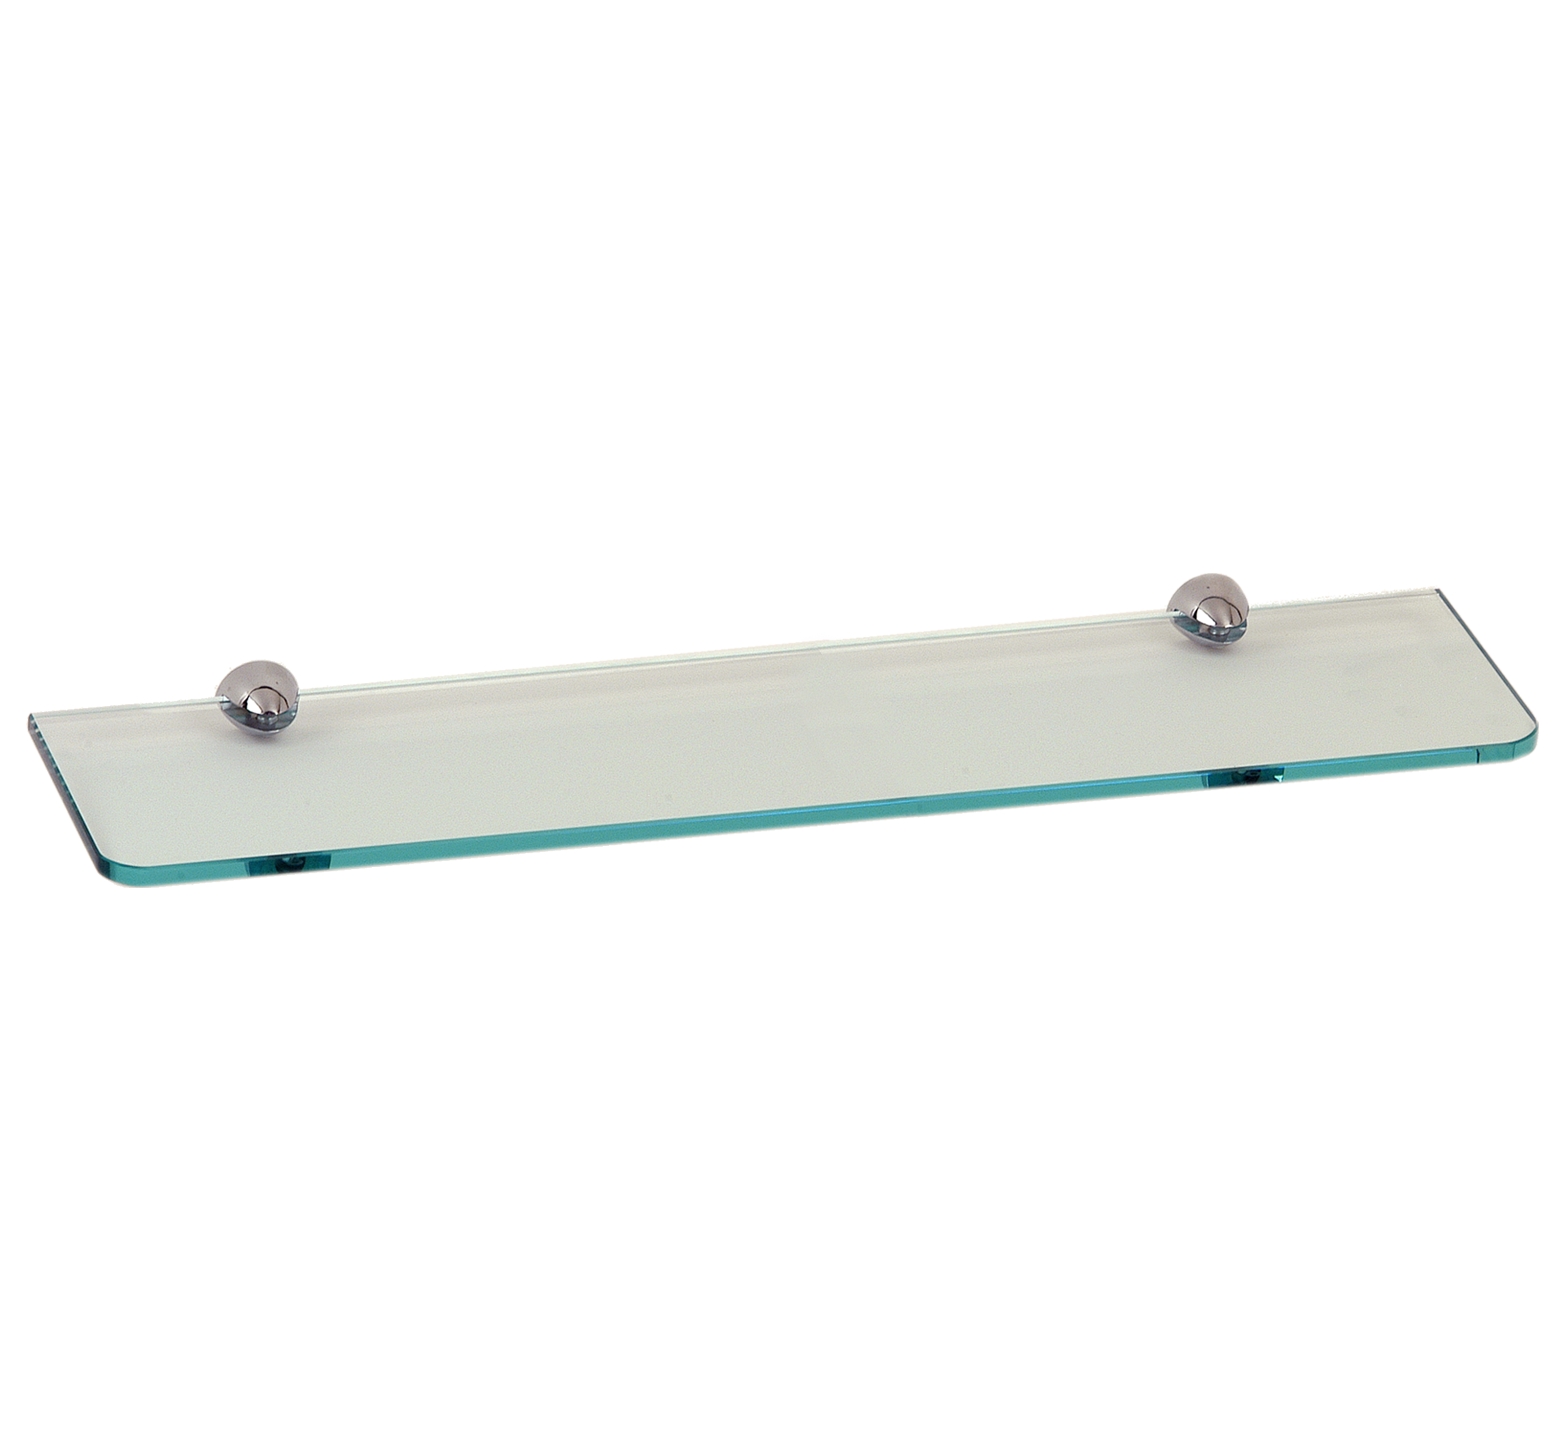 Crystal bath shelf and round brass clamps - Length 60 cm